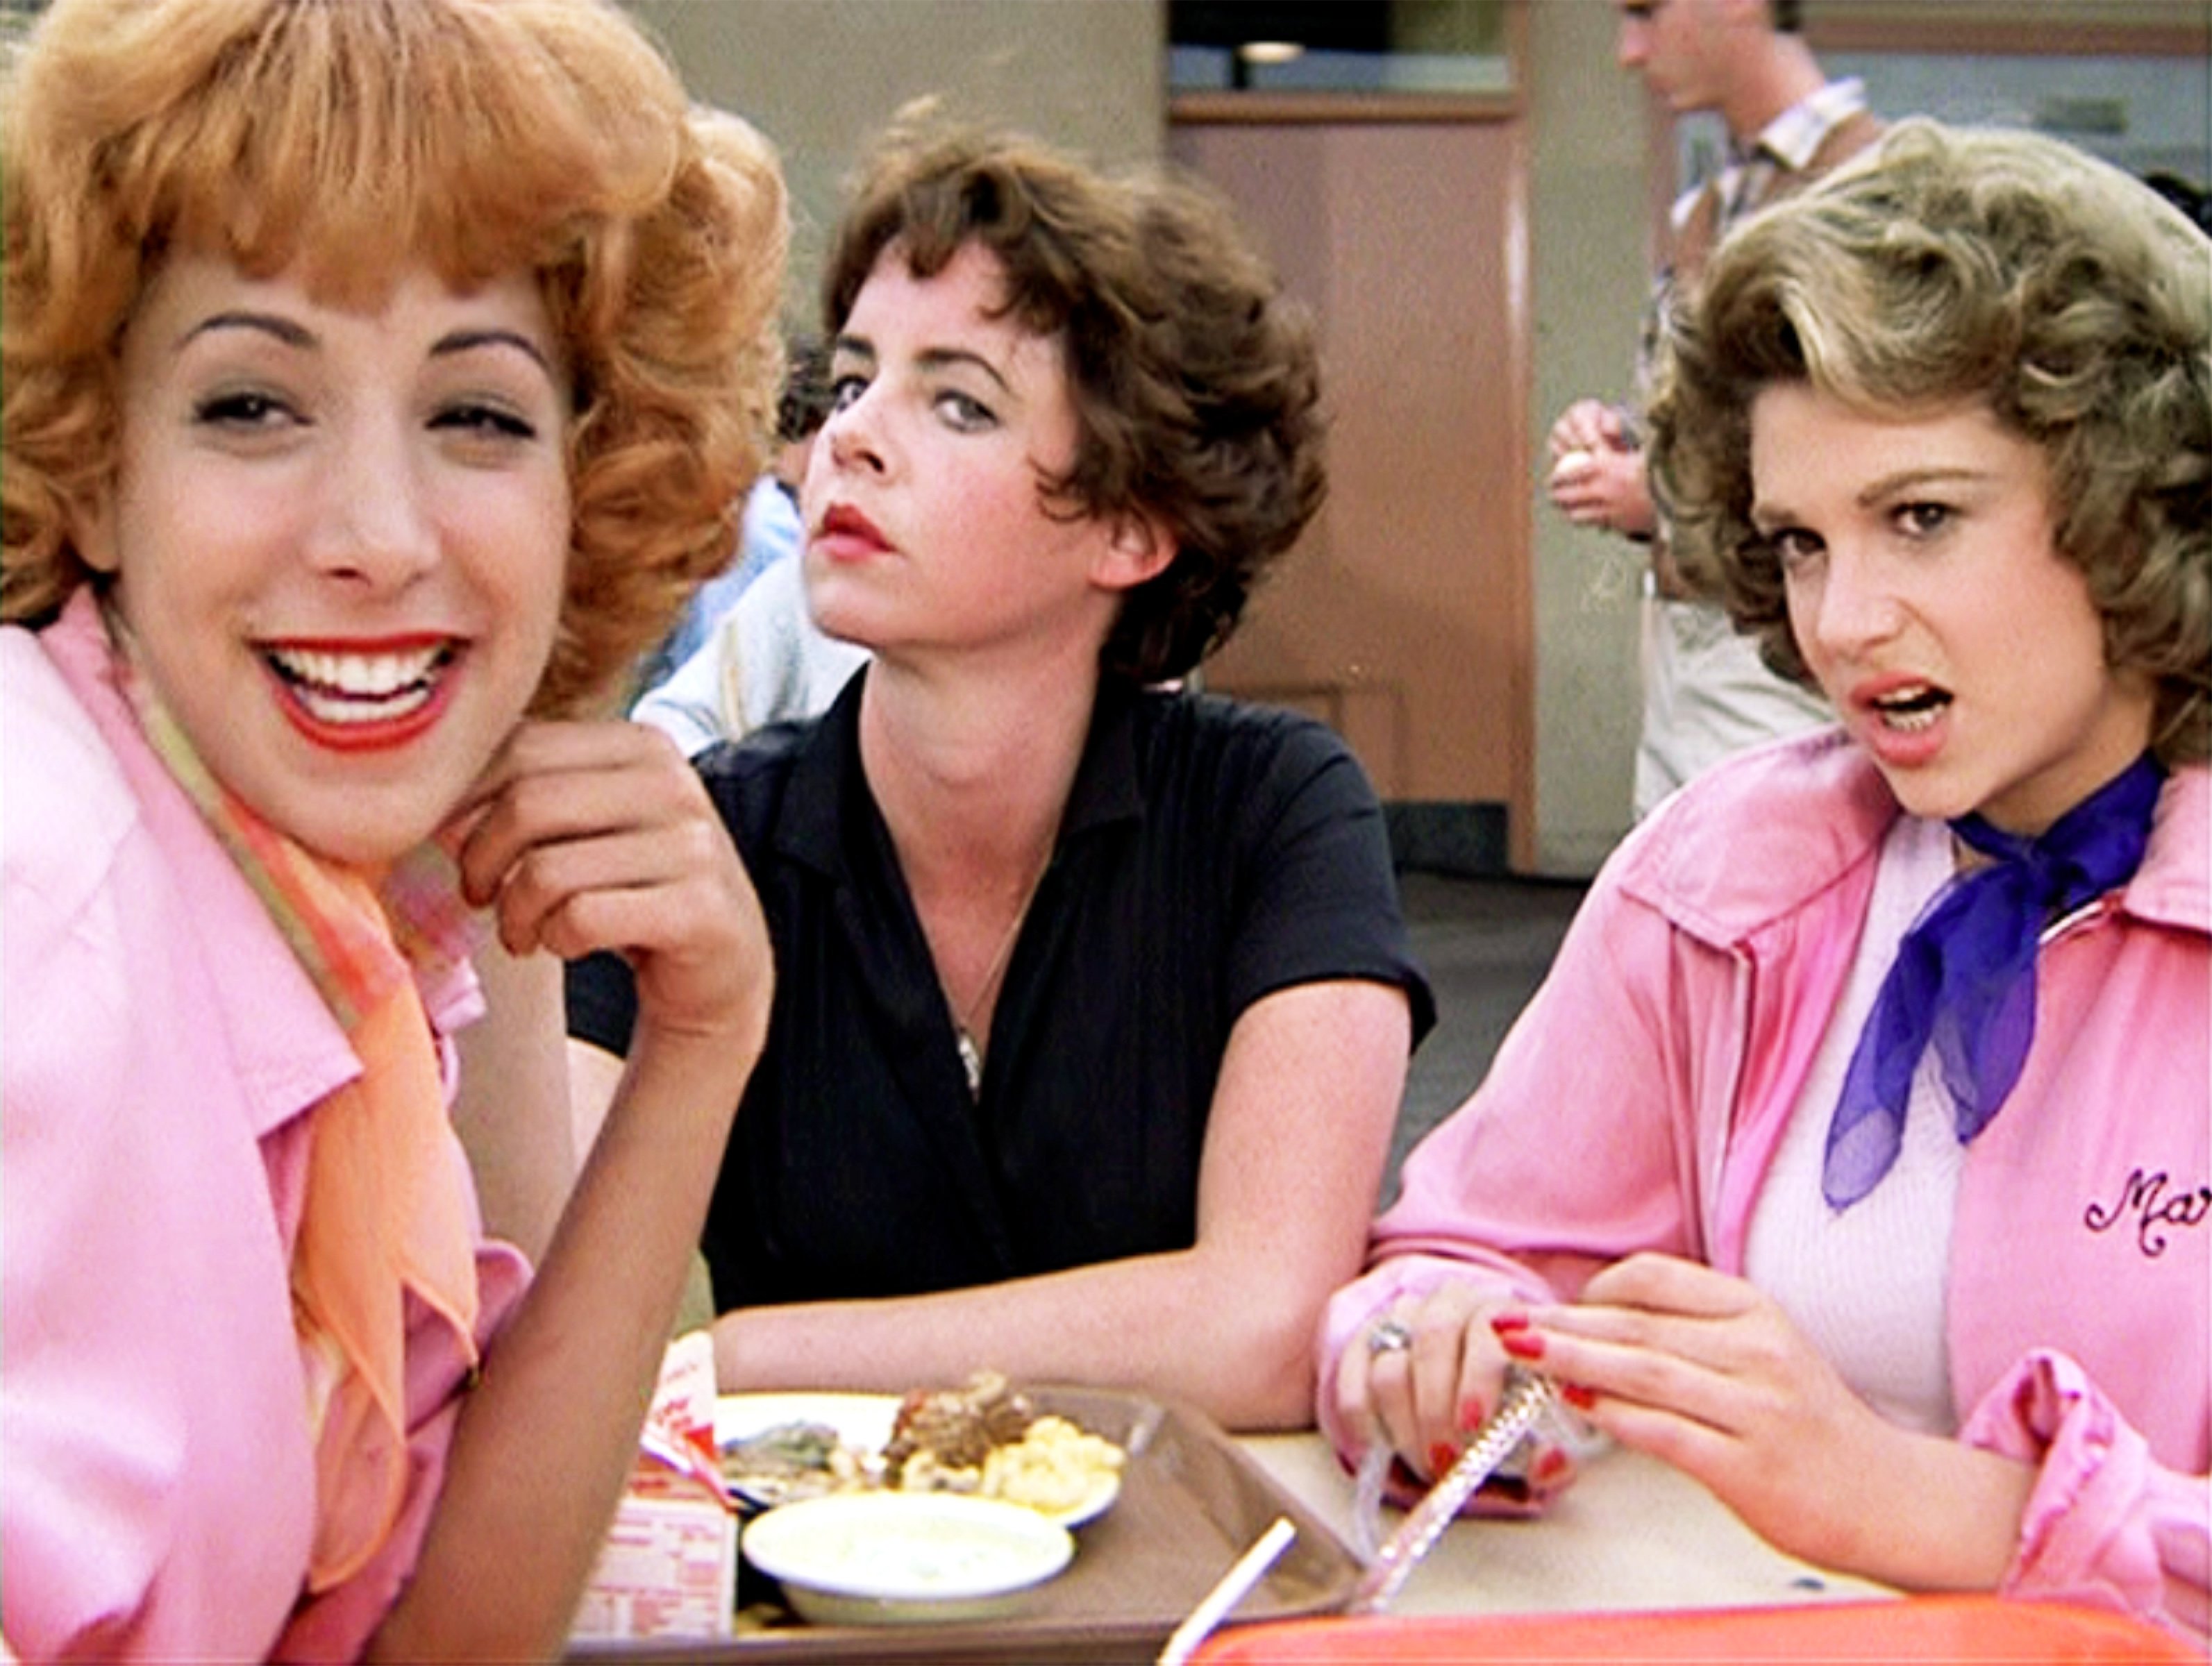 Didi Conn, Stockard Channing, and Dinah Manoff in "Grease," | Source: Getty Images